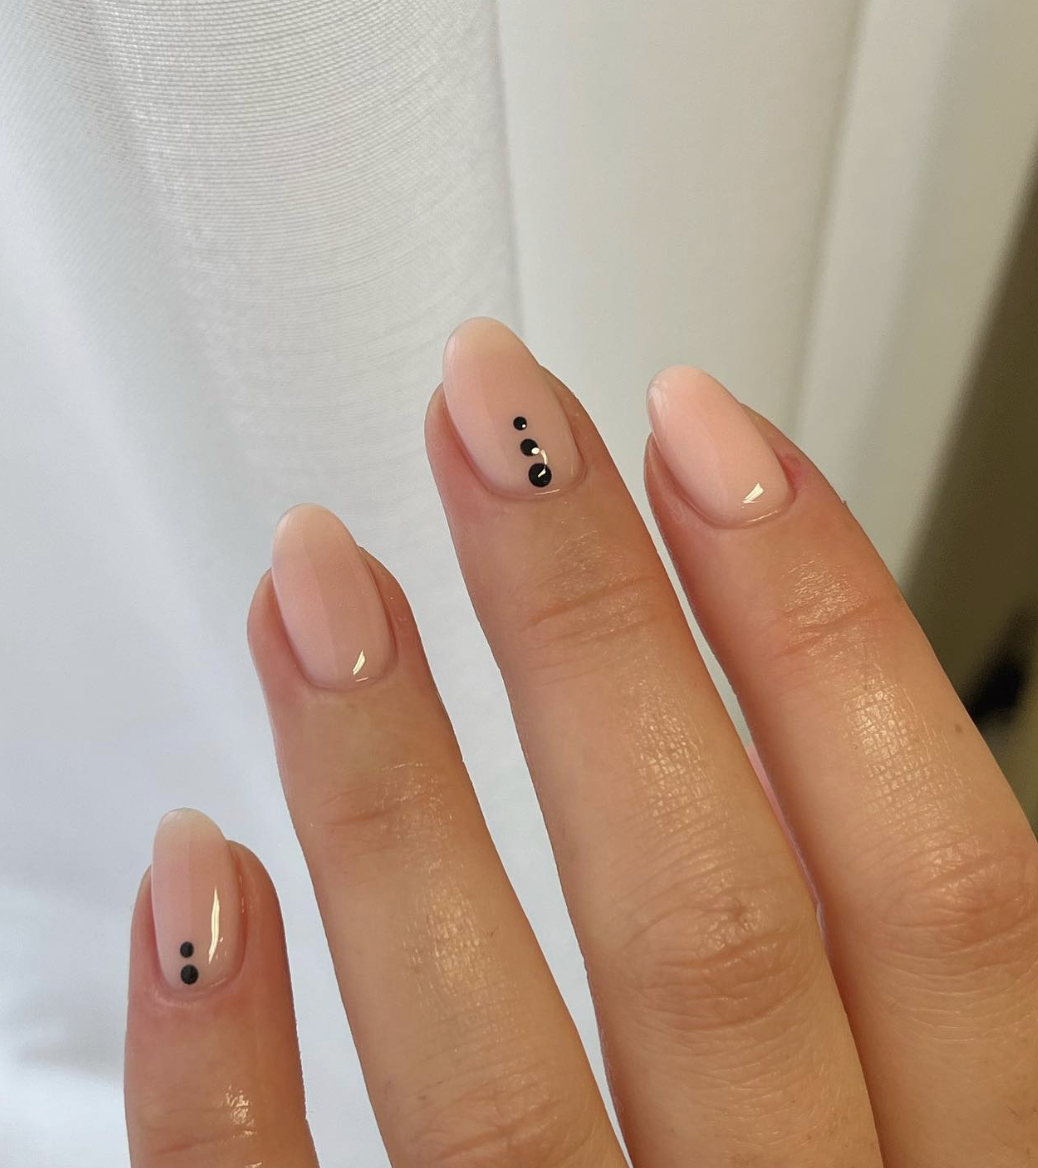 Image of a hand with pink nails and black dots